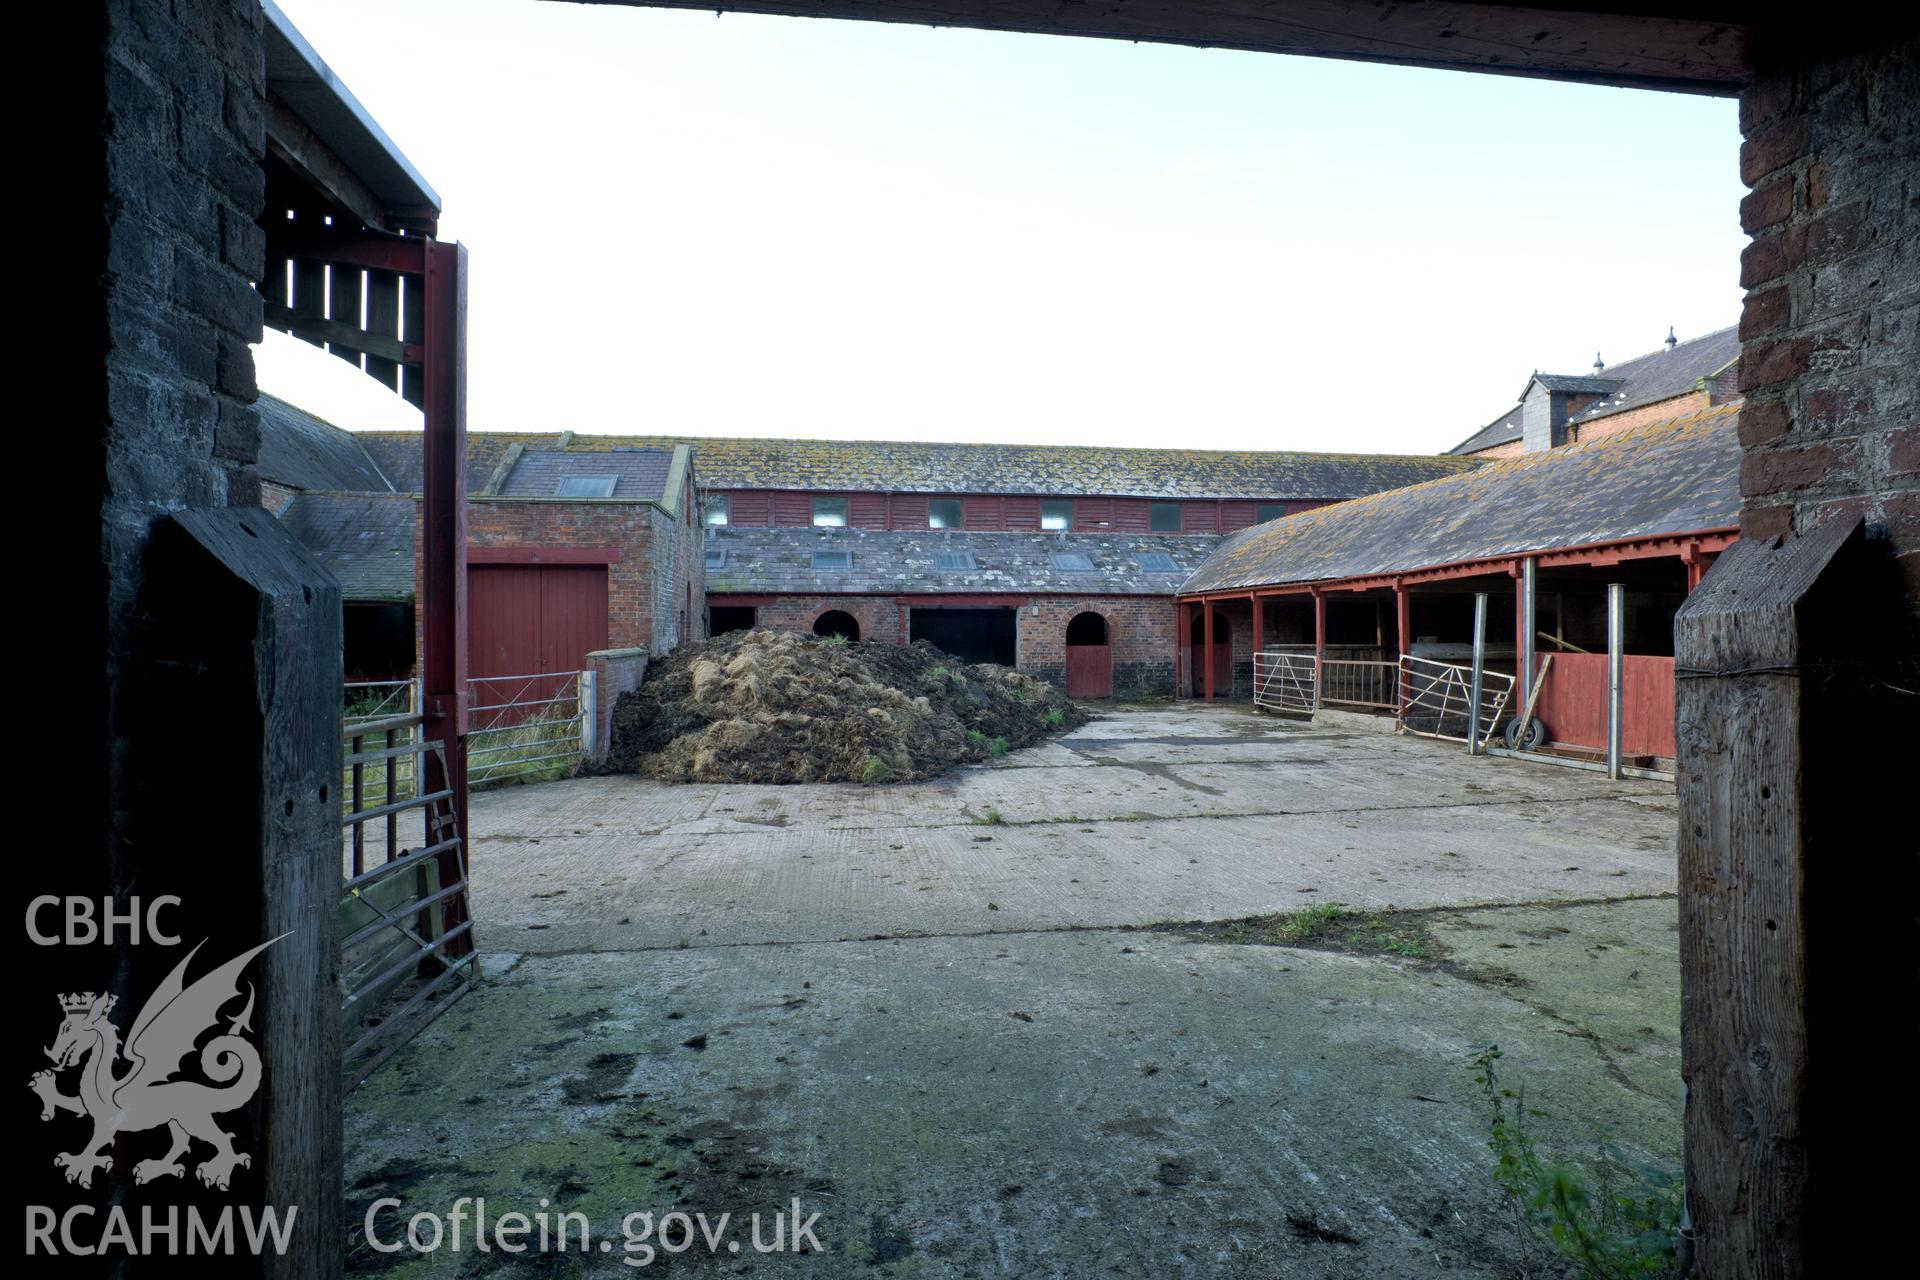 Northwest courtyard of cow sheds, from the north.